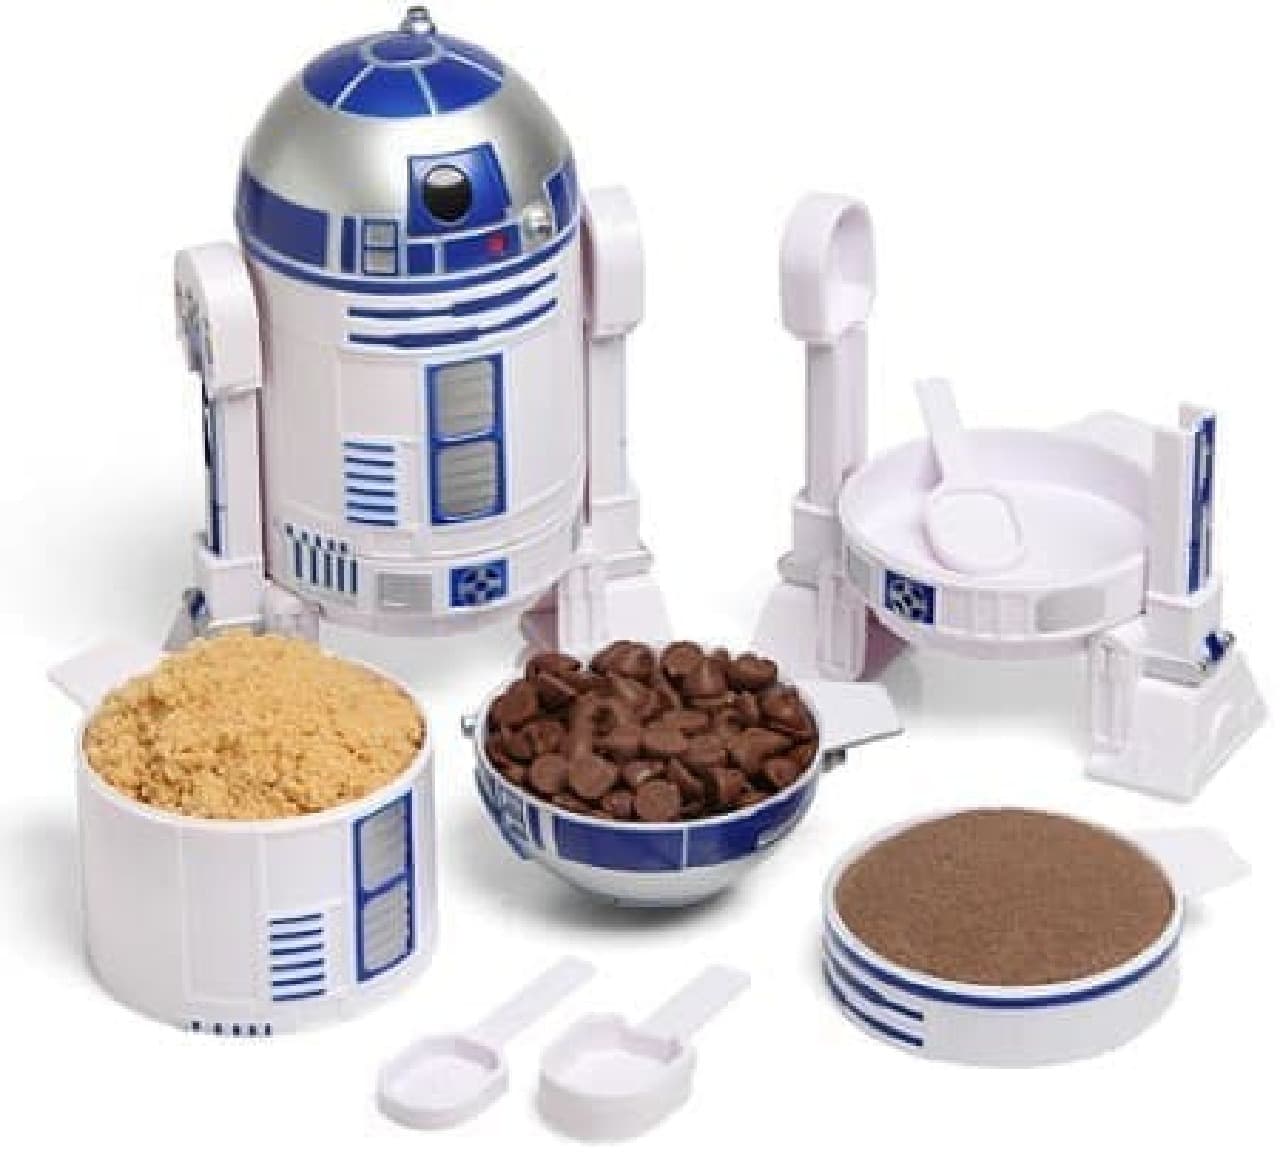 R2-D2 is too practical